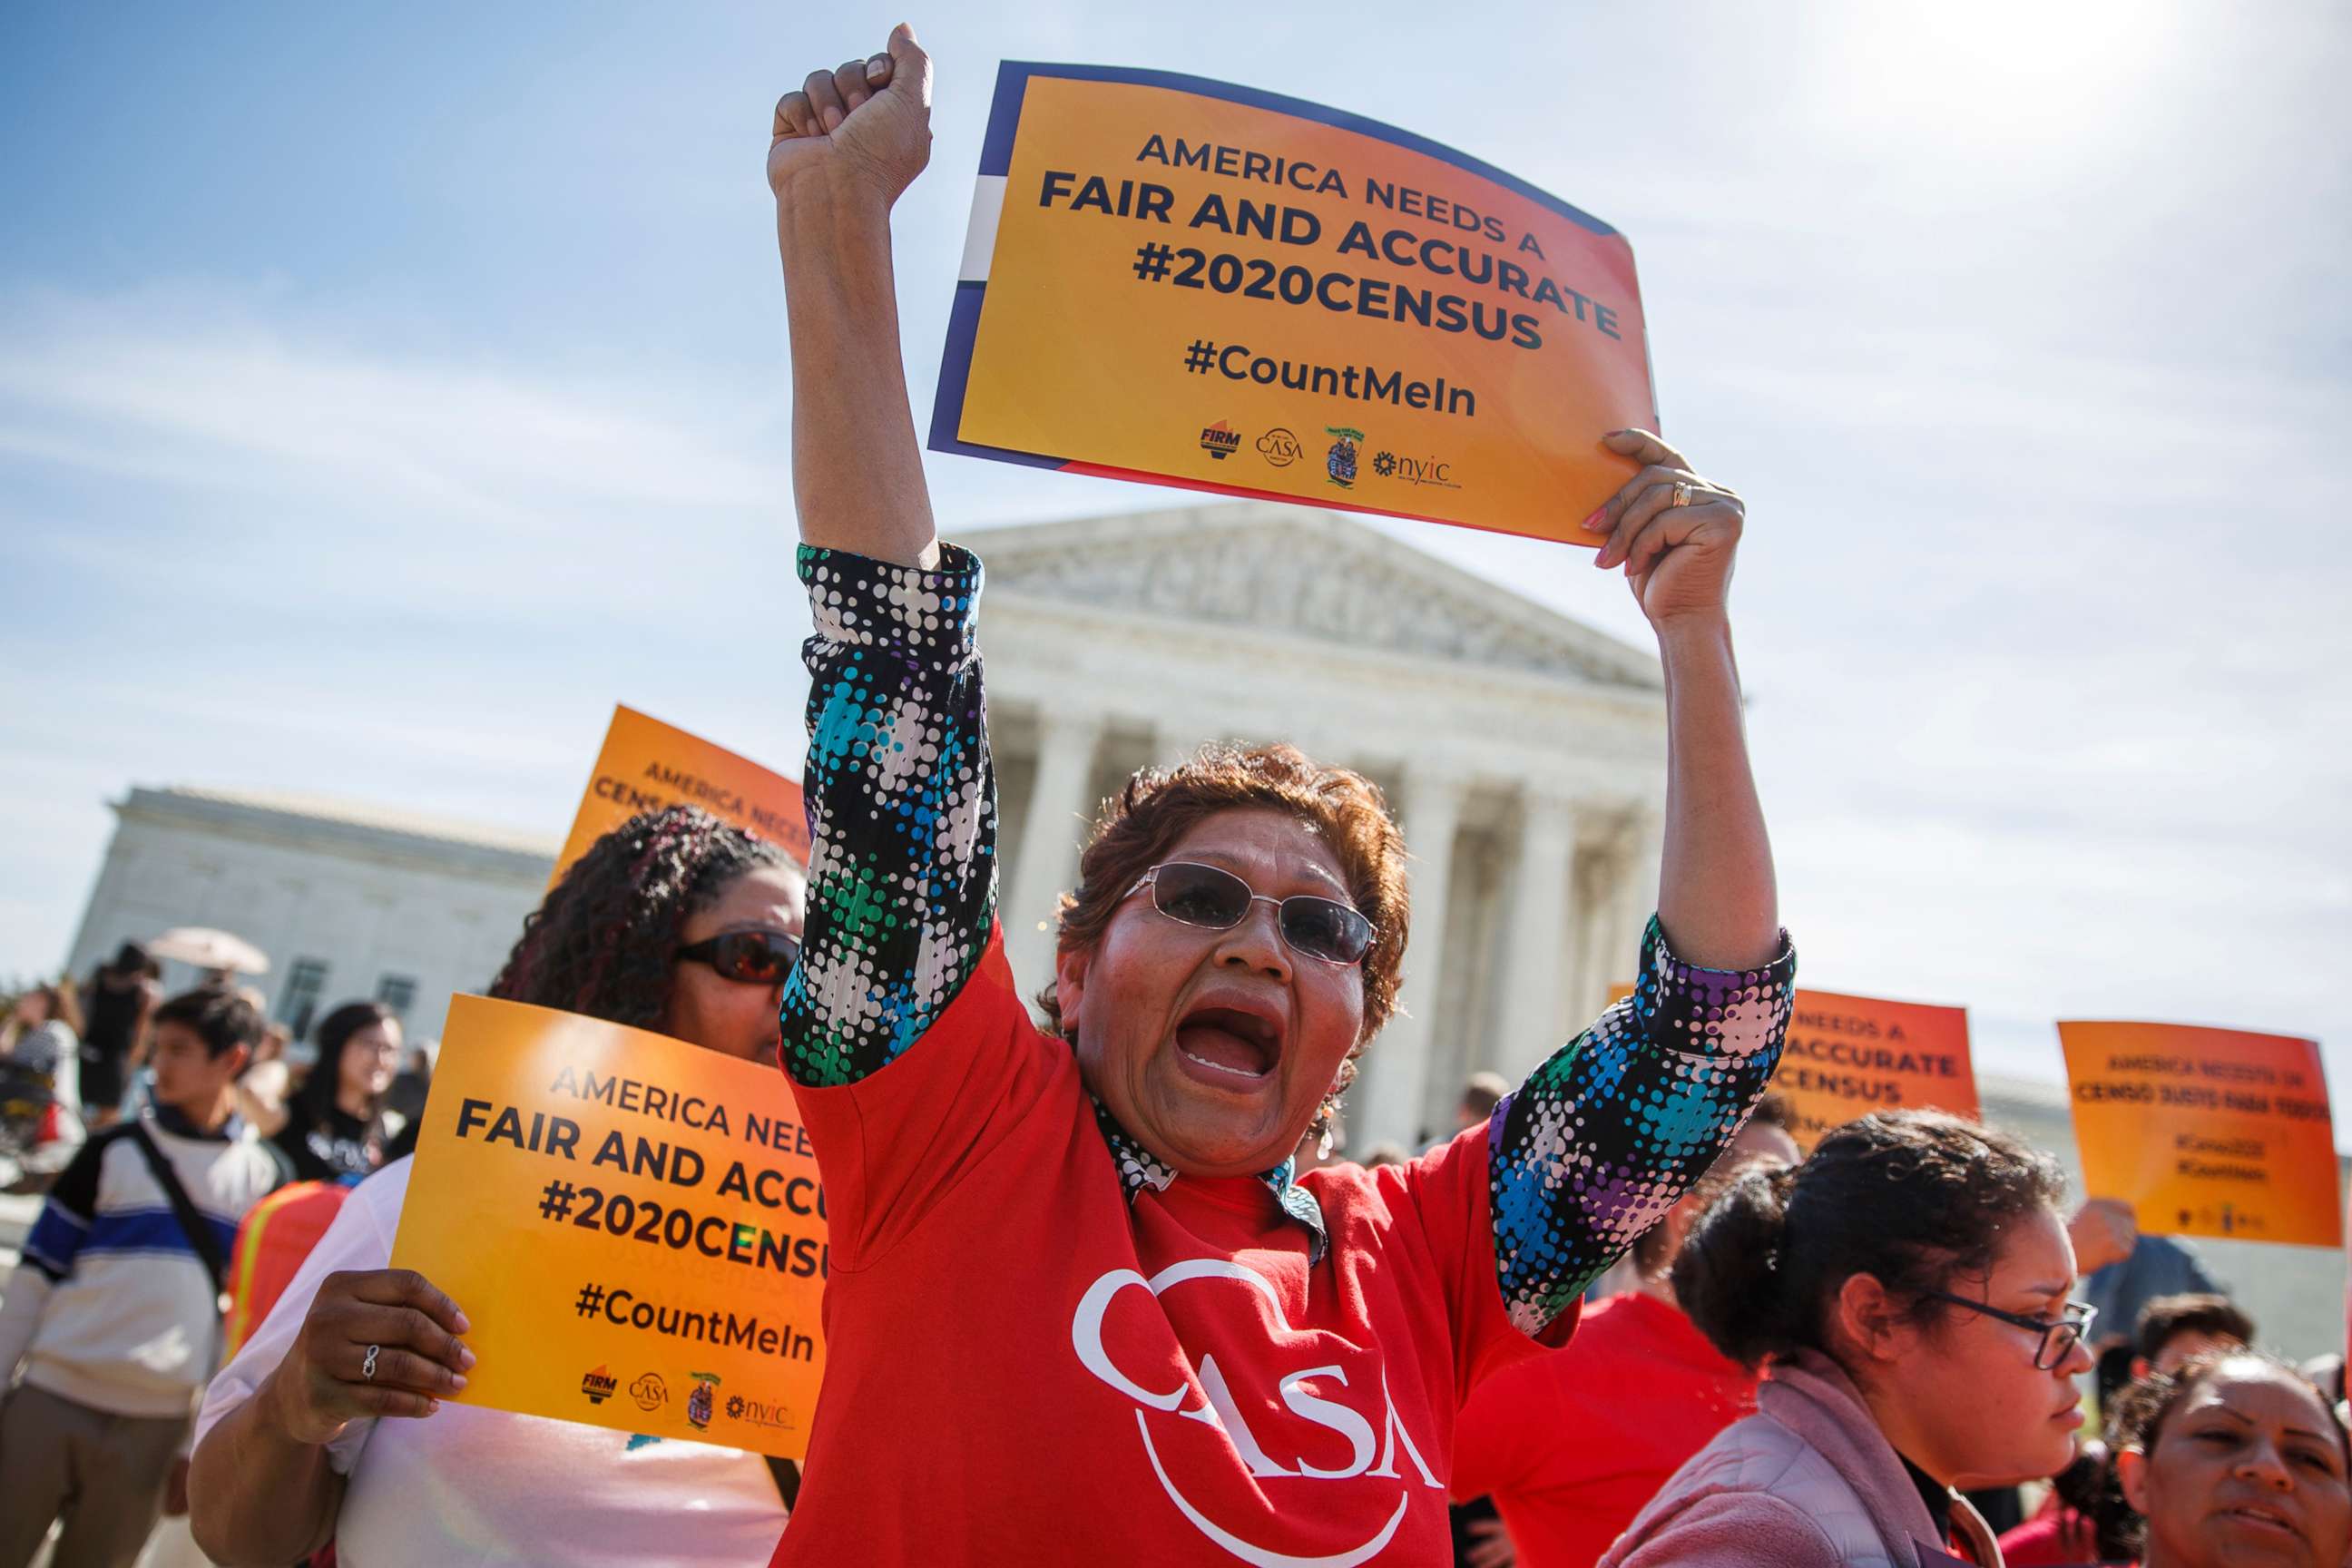 PHOTO: People protest against a citizenship question on the 2020 census in front of the Supreme Court in Washington, D.C., April 23, 2019.